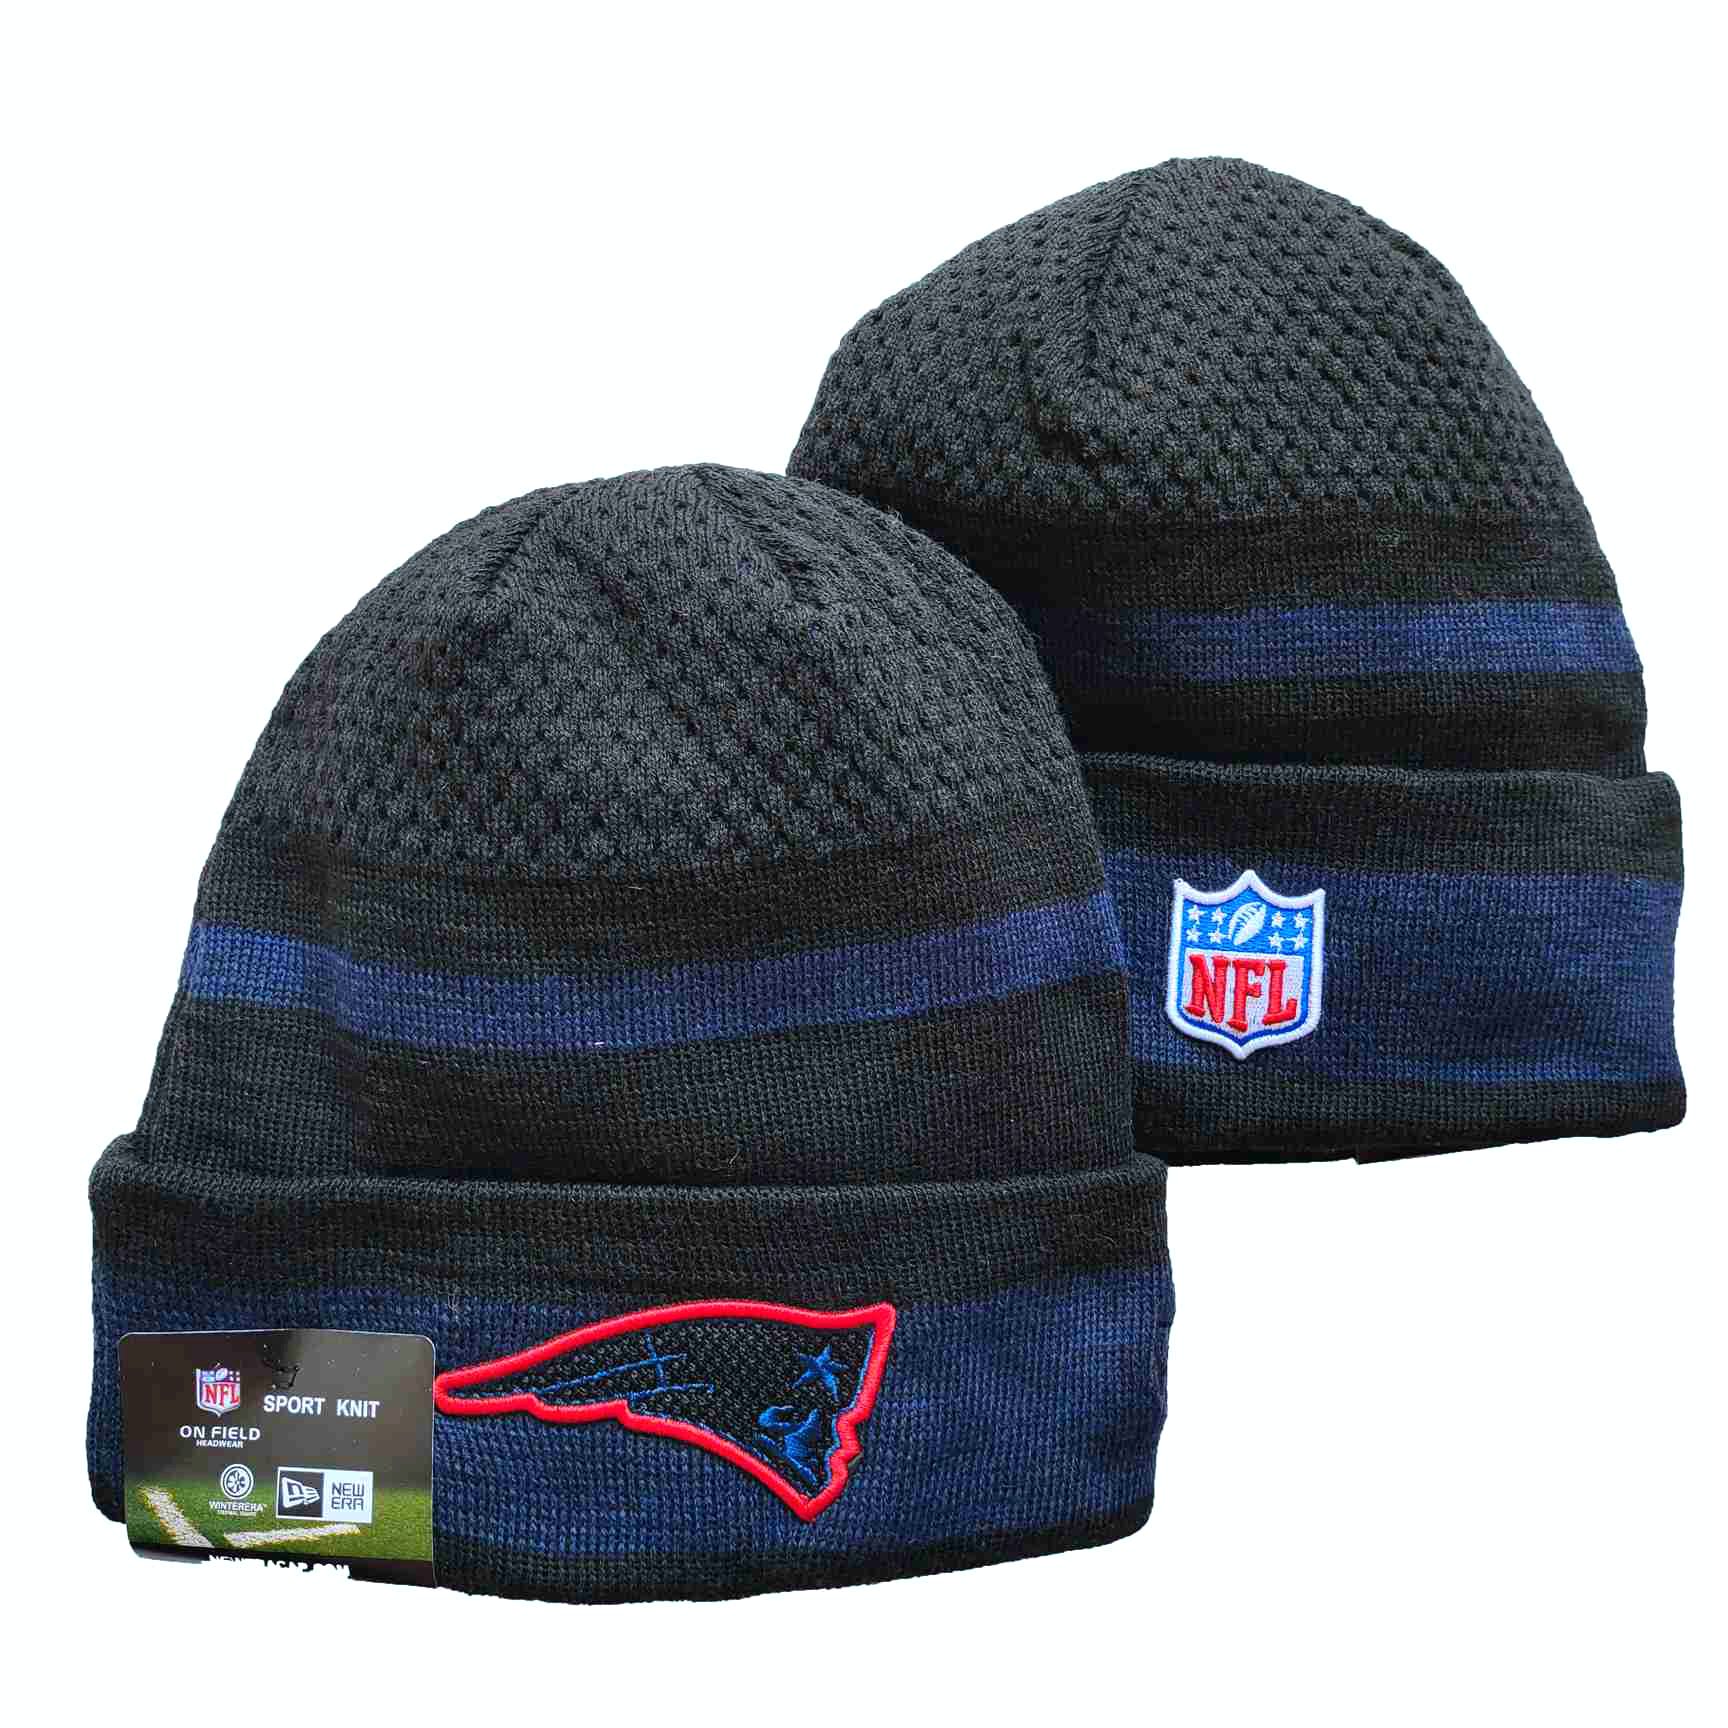 NFL New England Patriots Beanies Knit Hats-YD1247